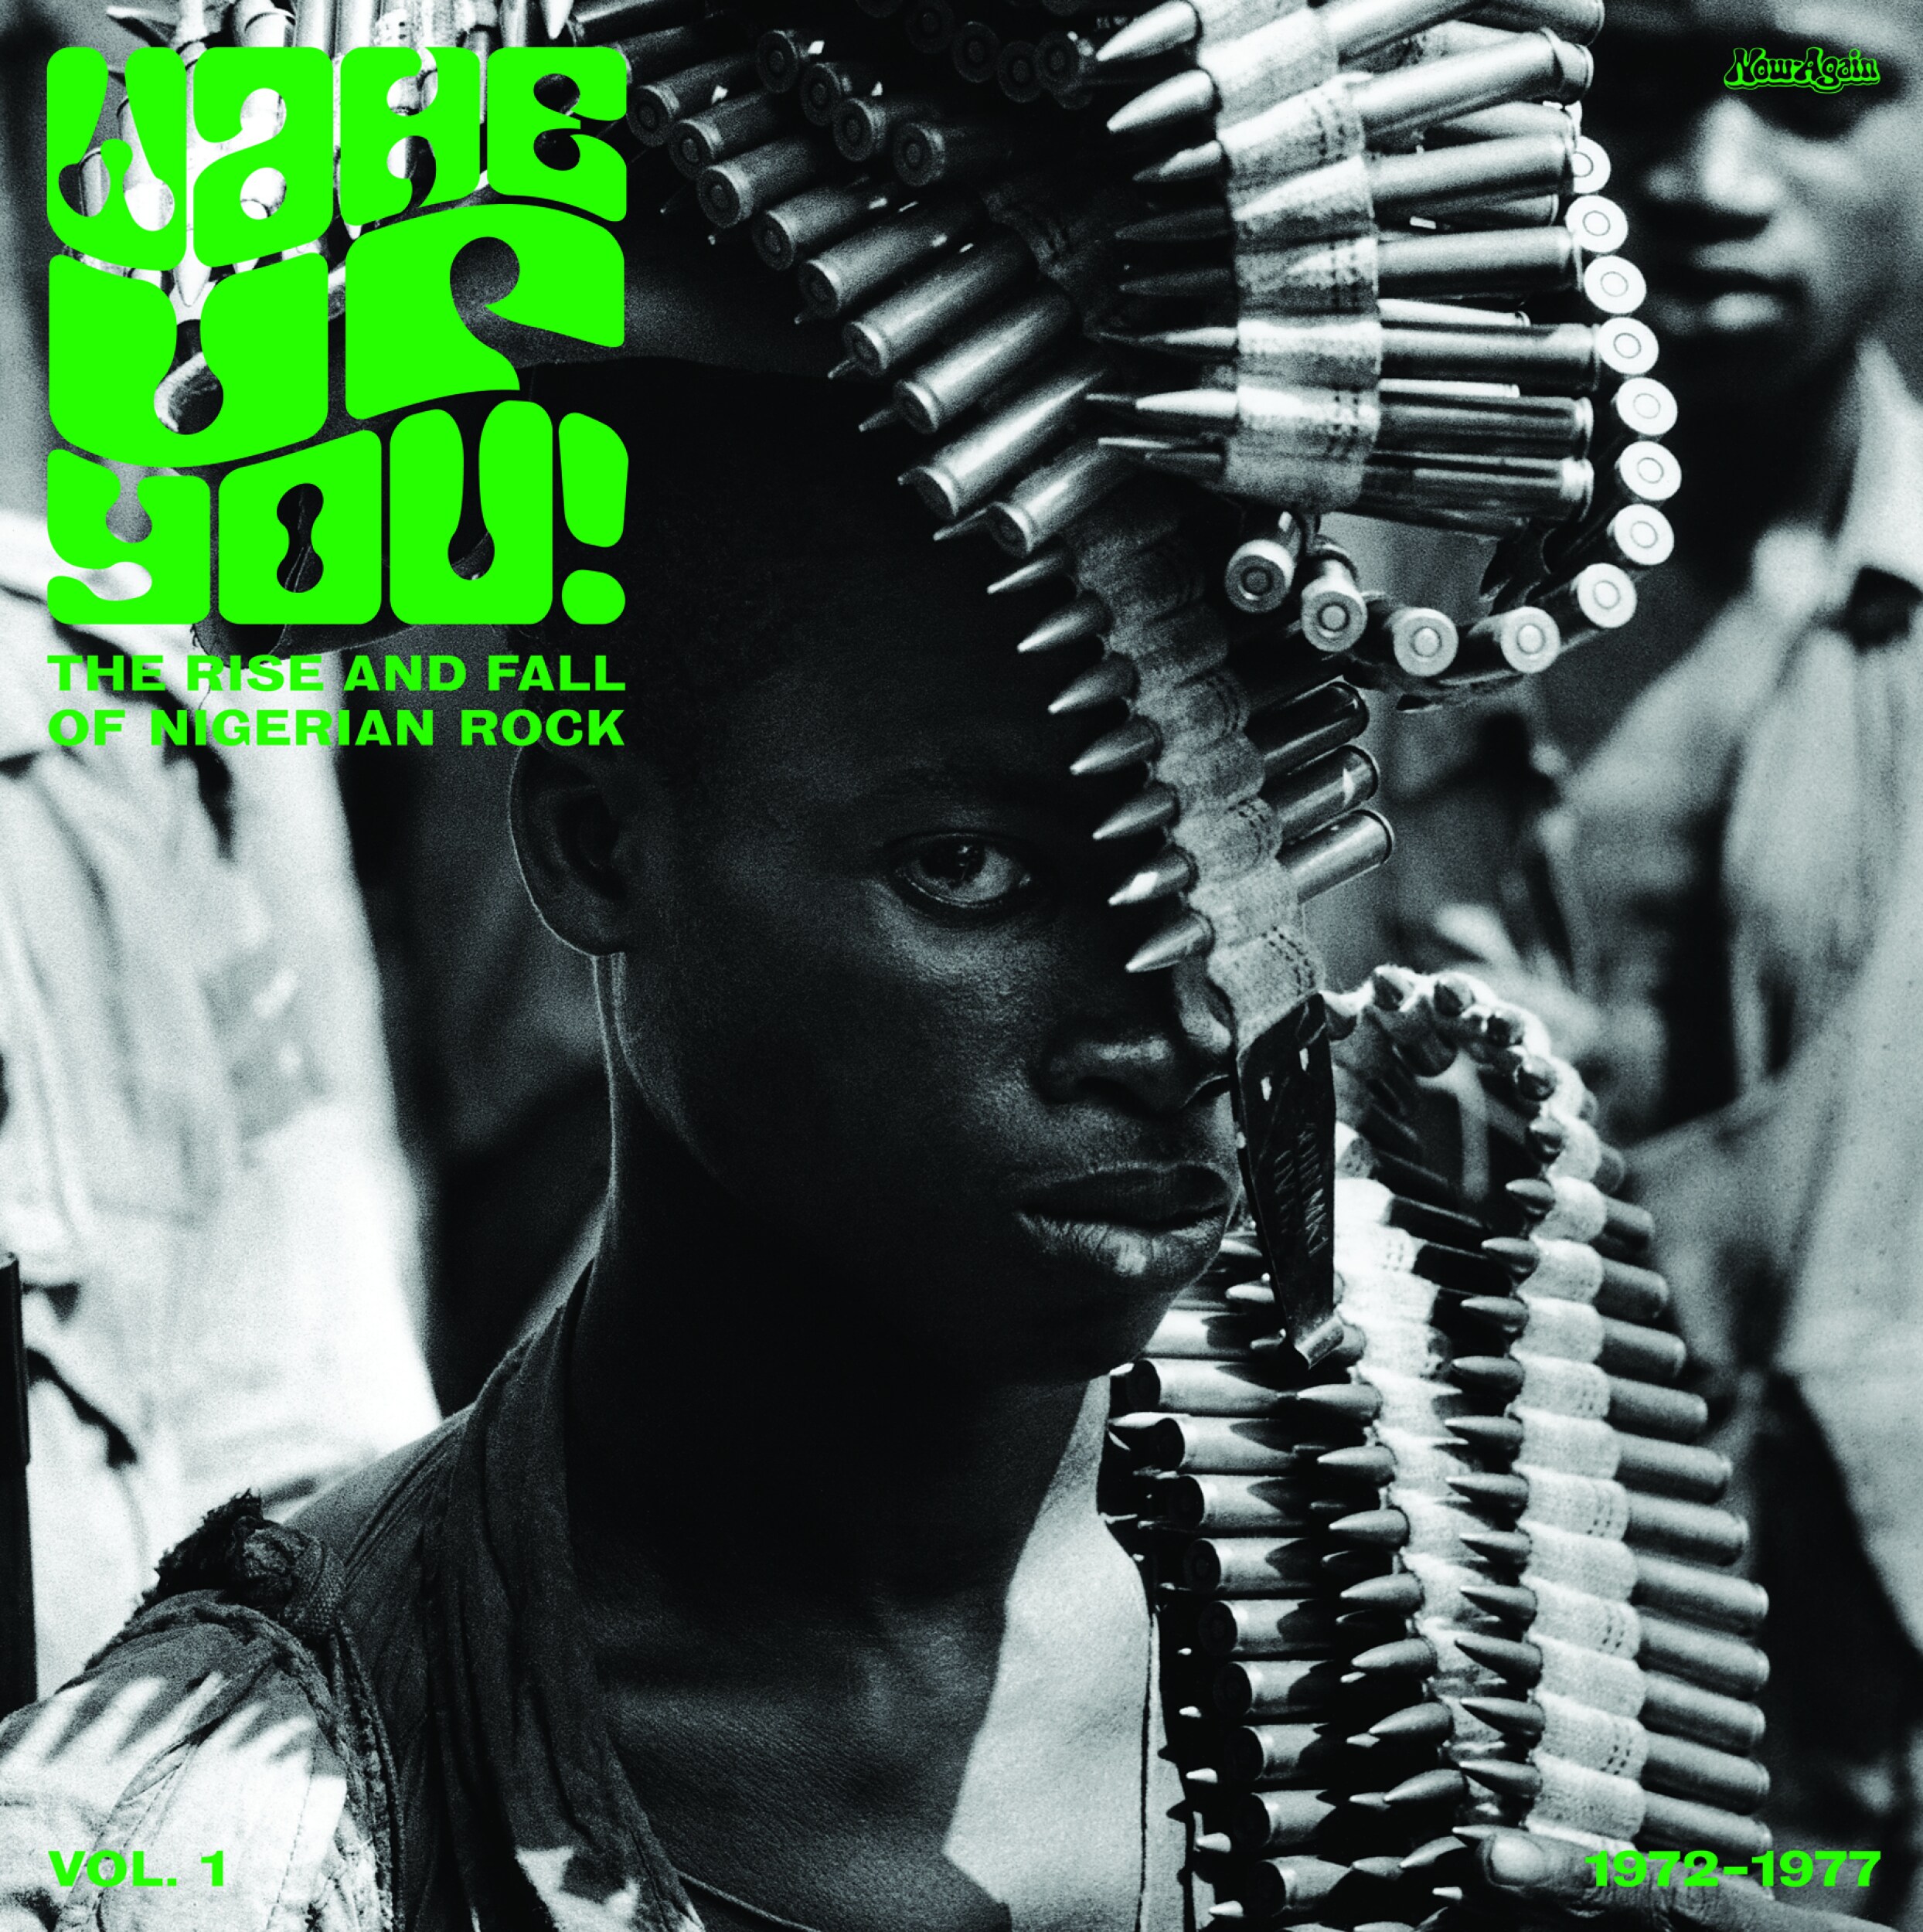 VA – Wake Up You! The Rise And Fall of Nigerian Rock 1972-1977 Vol. 1 (DOLP)